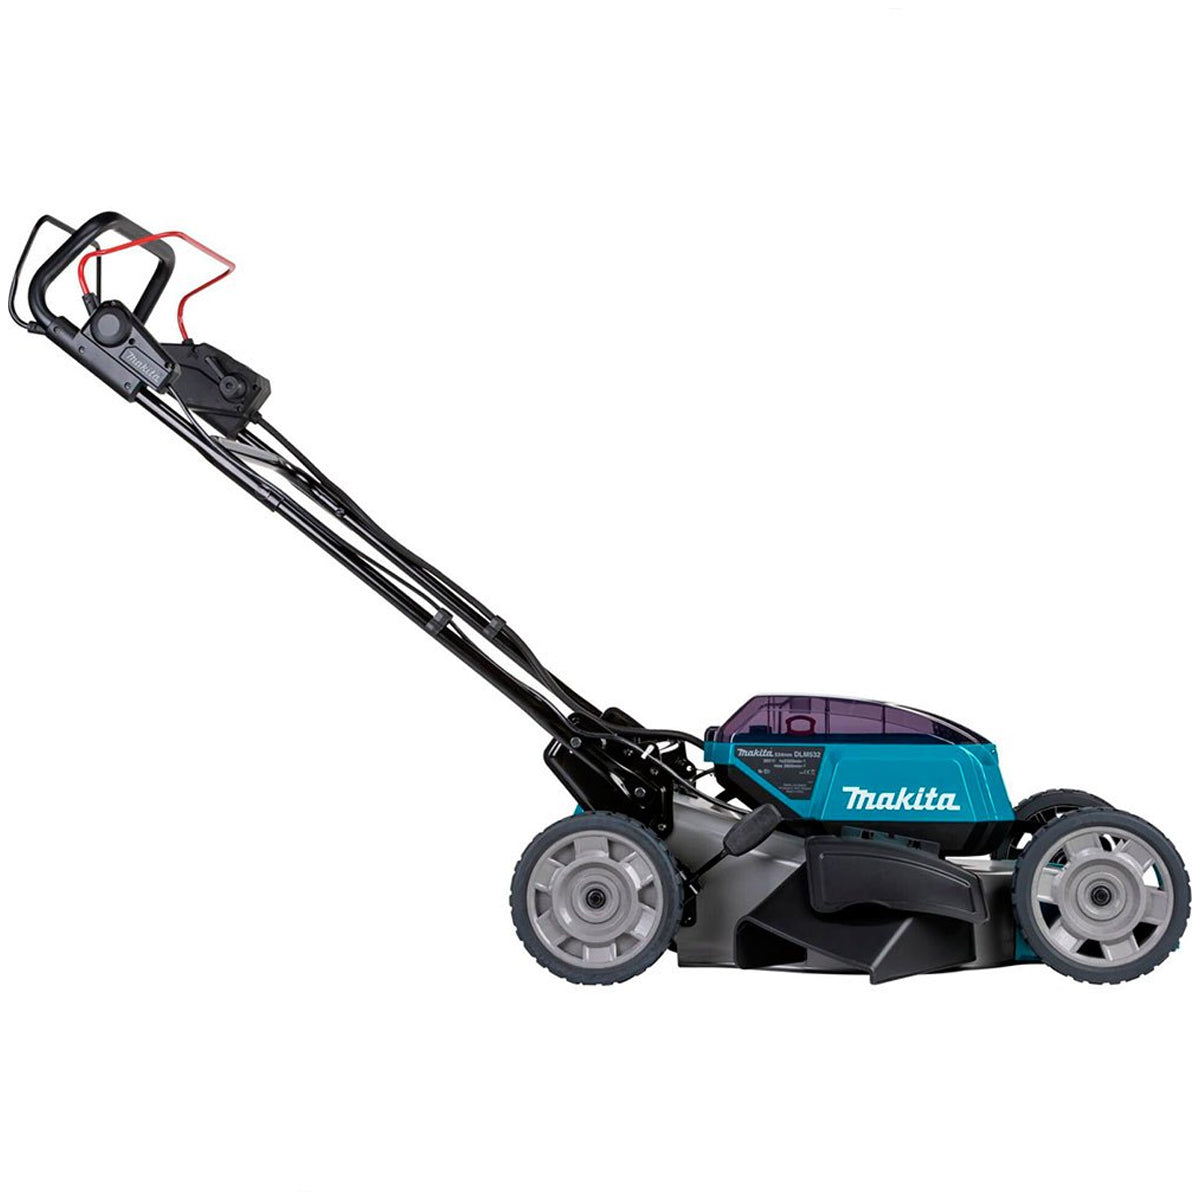 Makita DLM532PT4 36V Brushless Lawn Mower 534mm with 4 x 5.0Ah Batteries & Charger